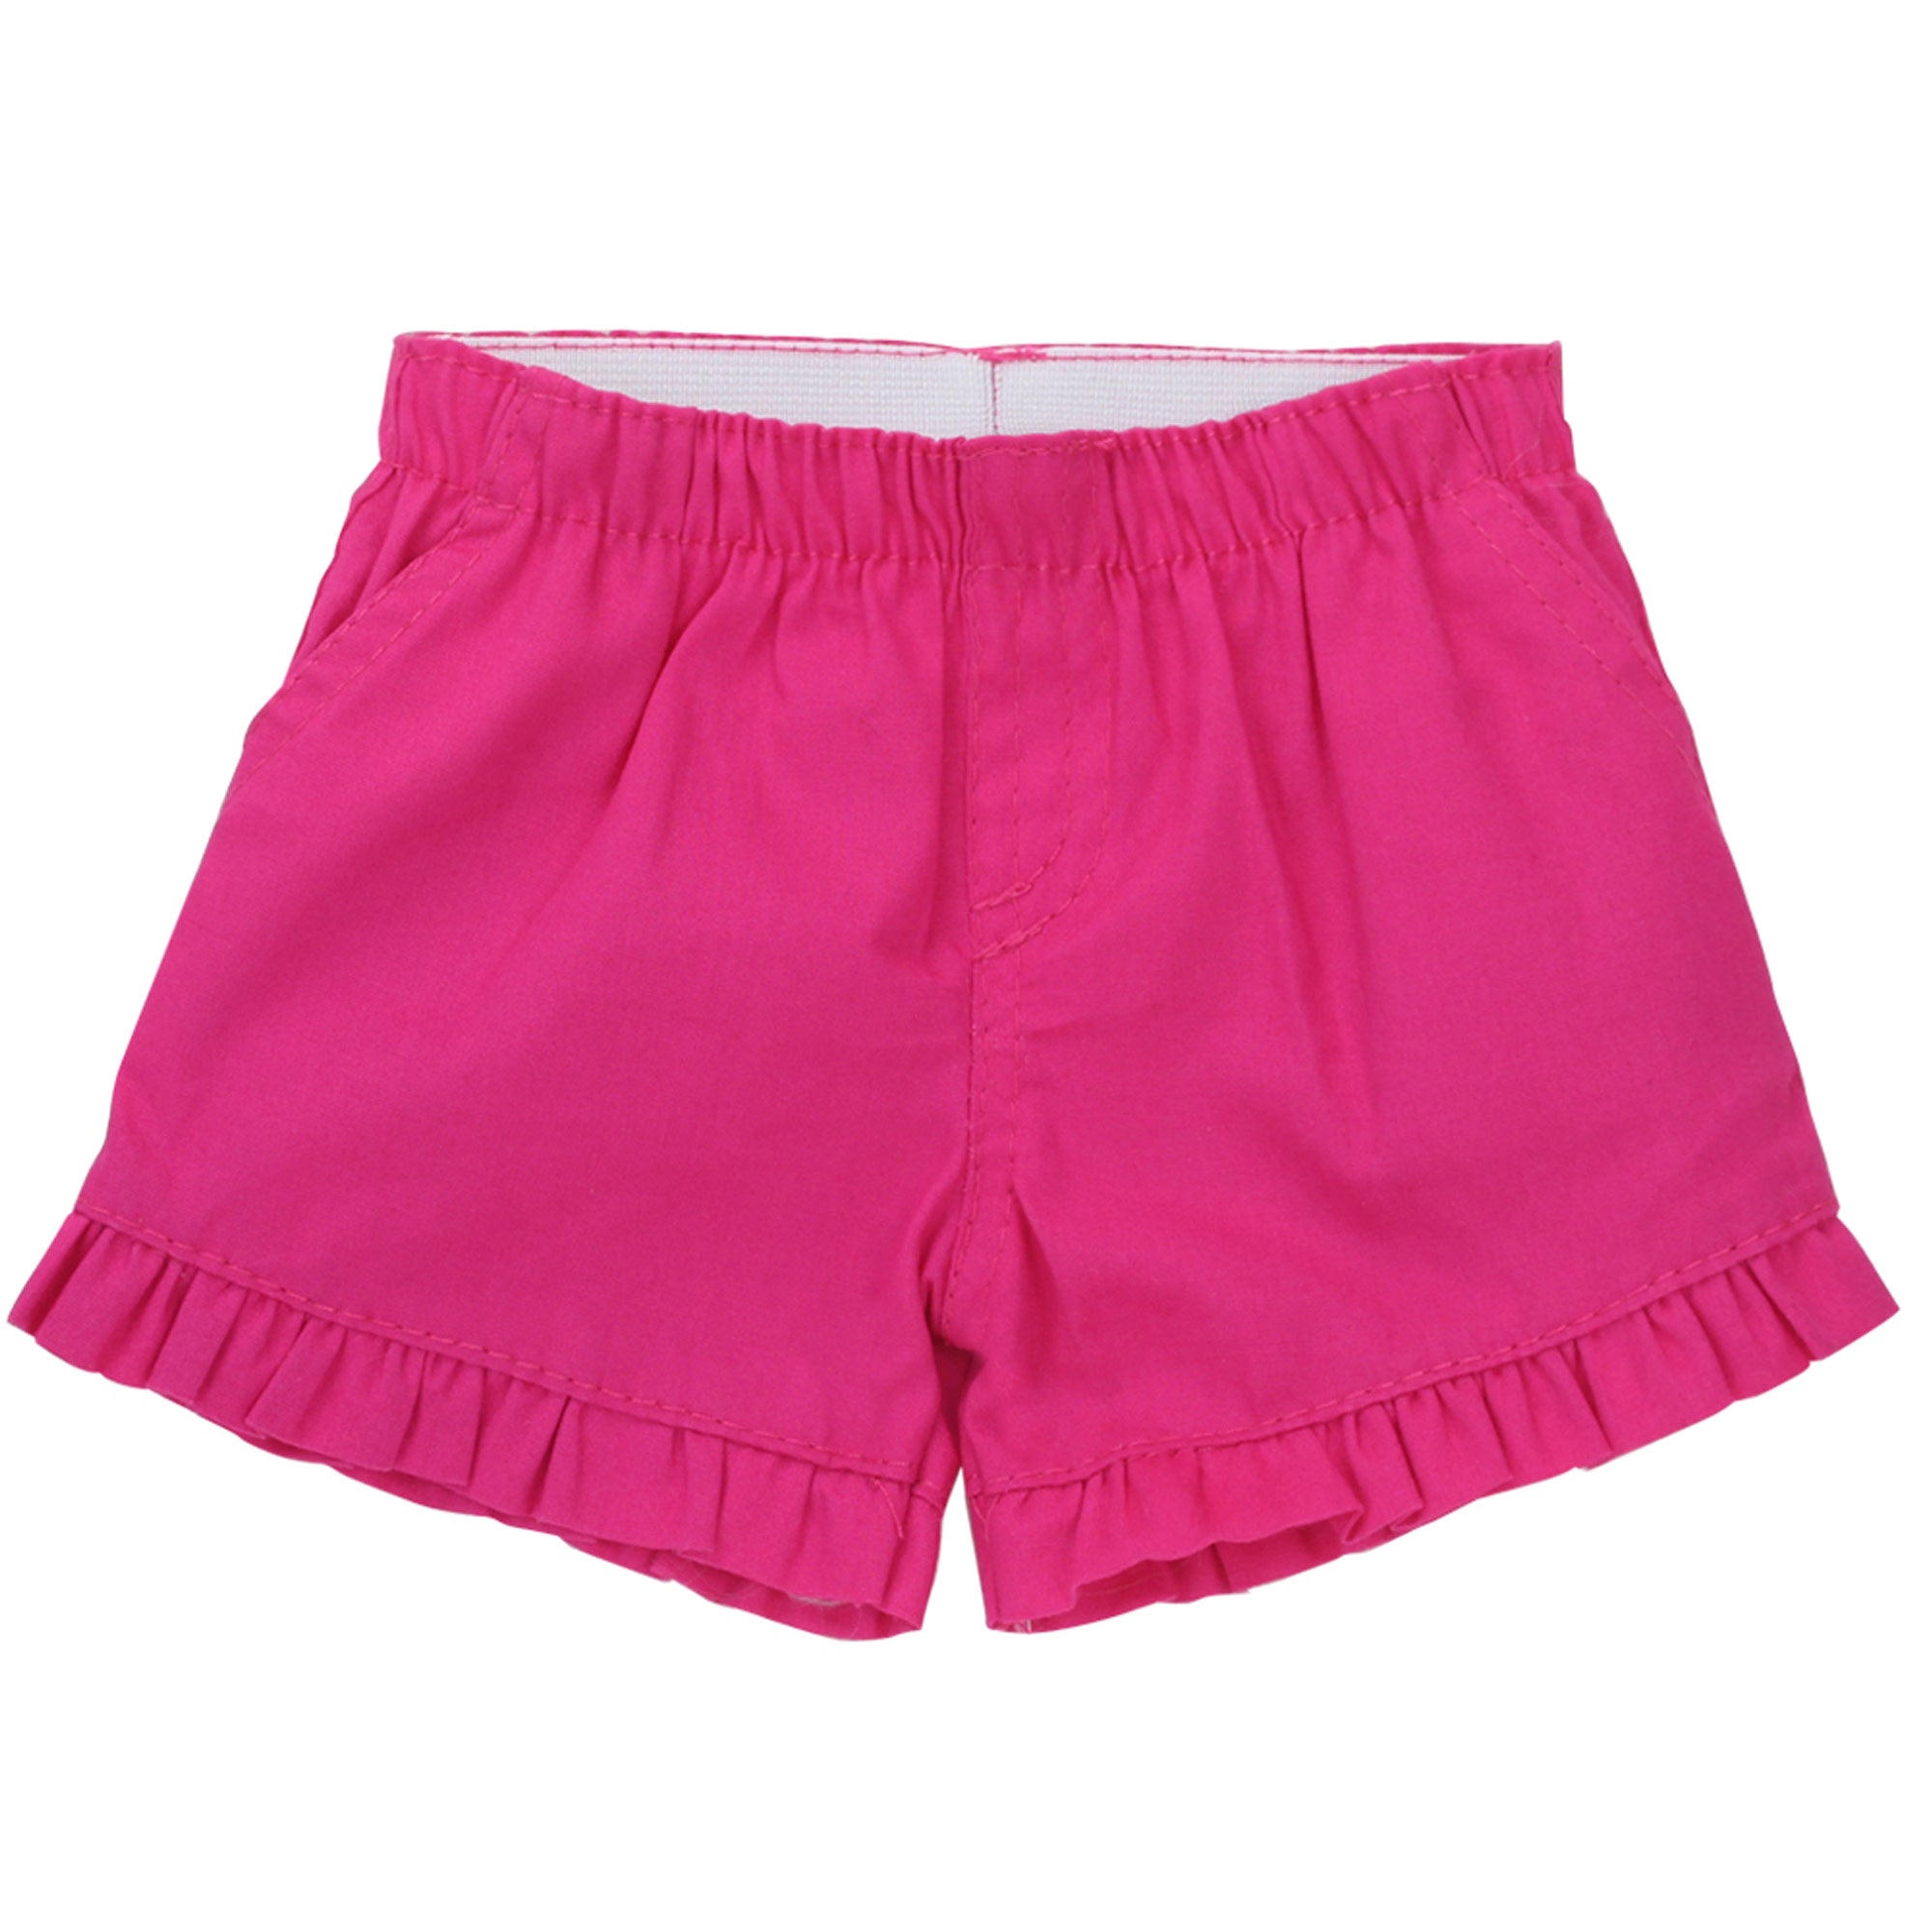 Sophia’s Solid Colored Mix & Match Basic Summer Ruffle Shorts for 18” Dolls, Hot Pink